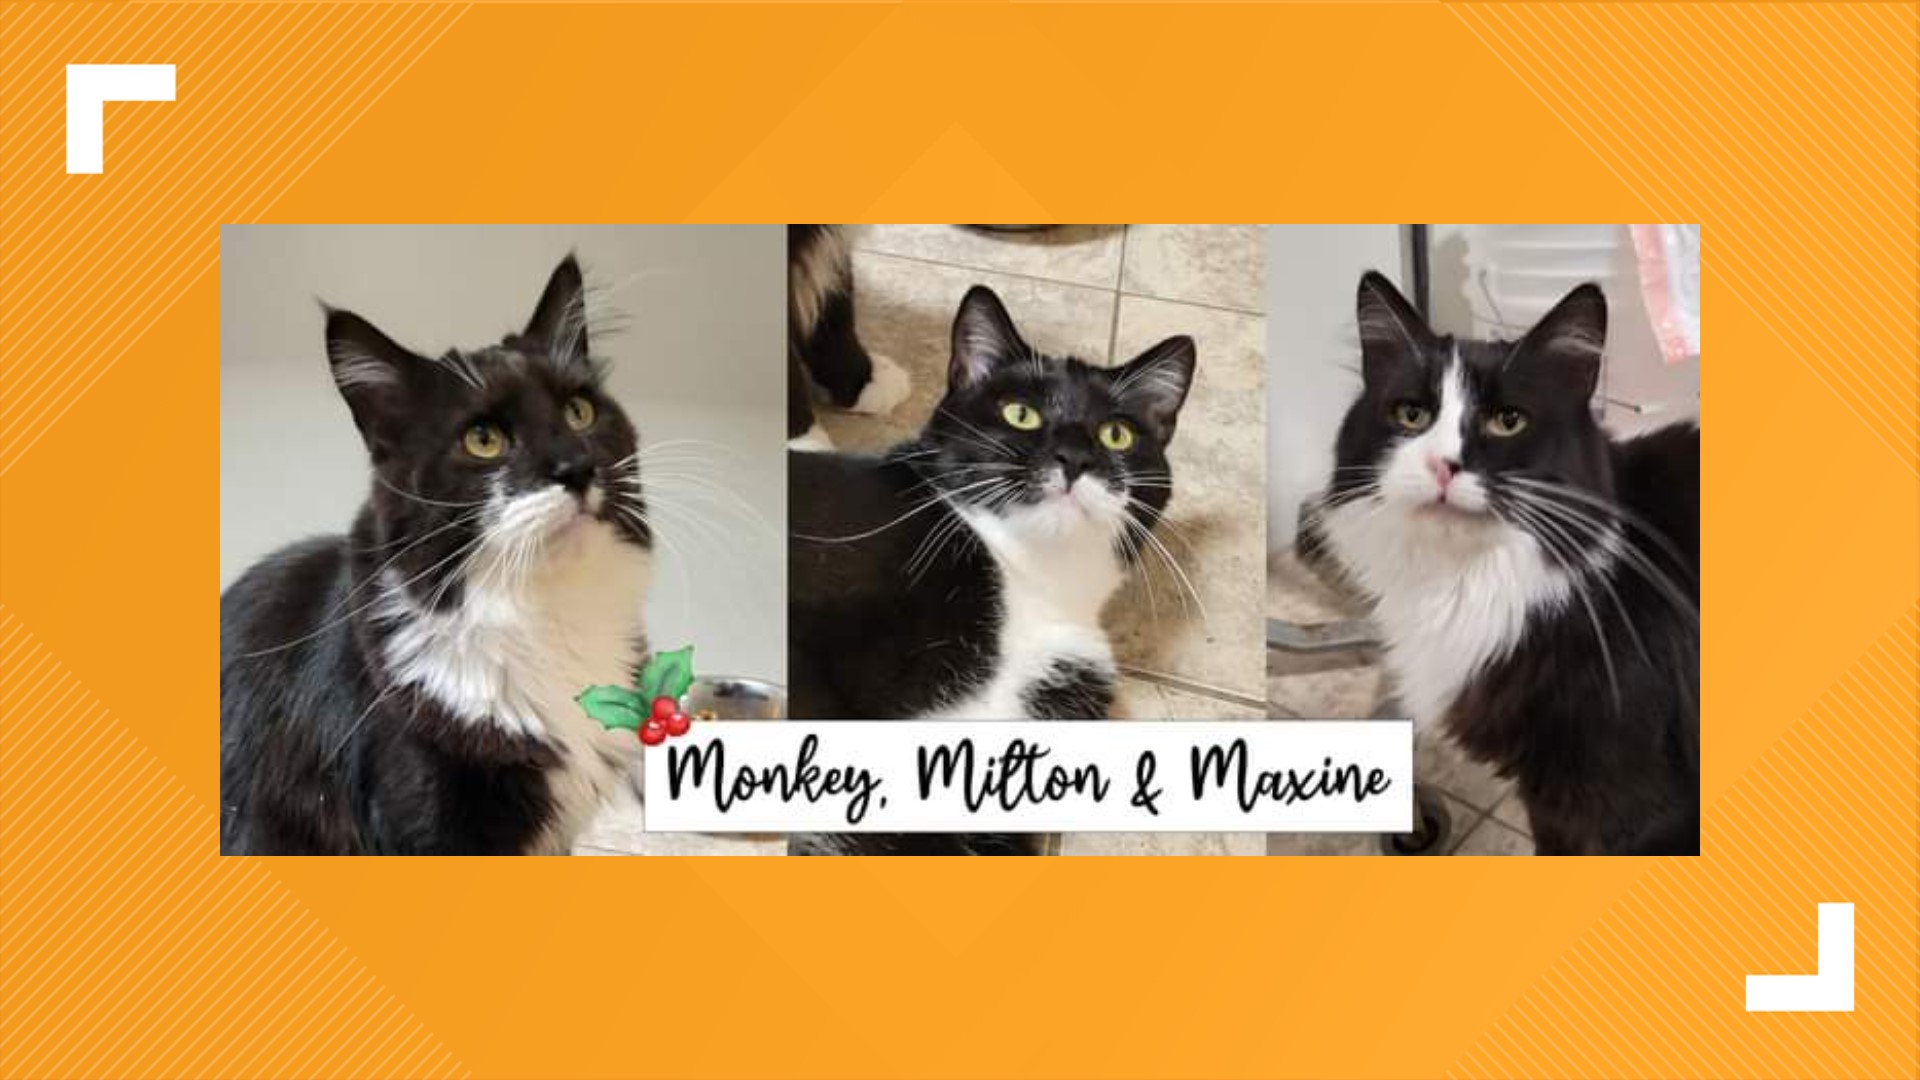 This family of cats is patiently waiting for their home for the holidays at Animal Rescue Inc.